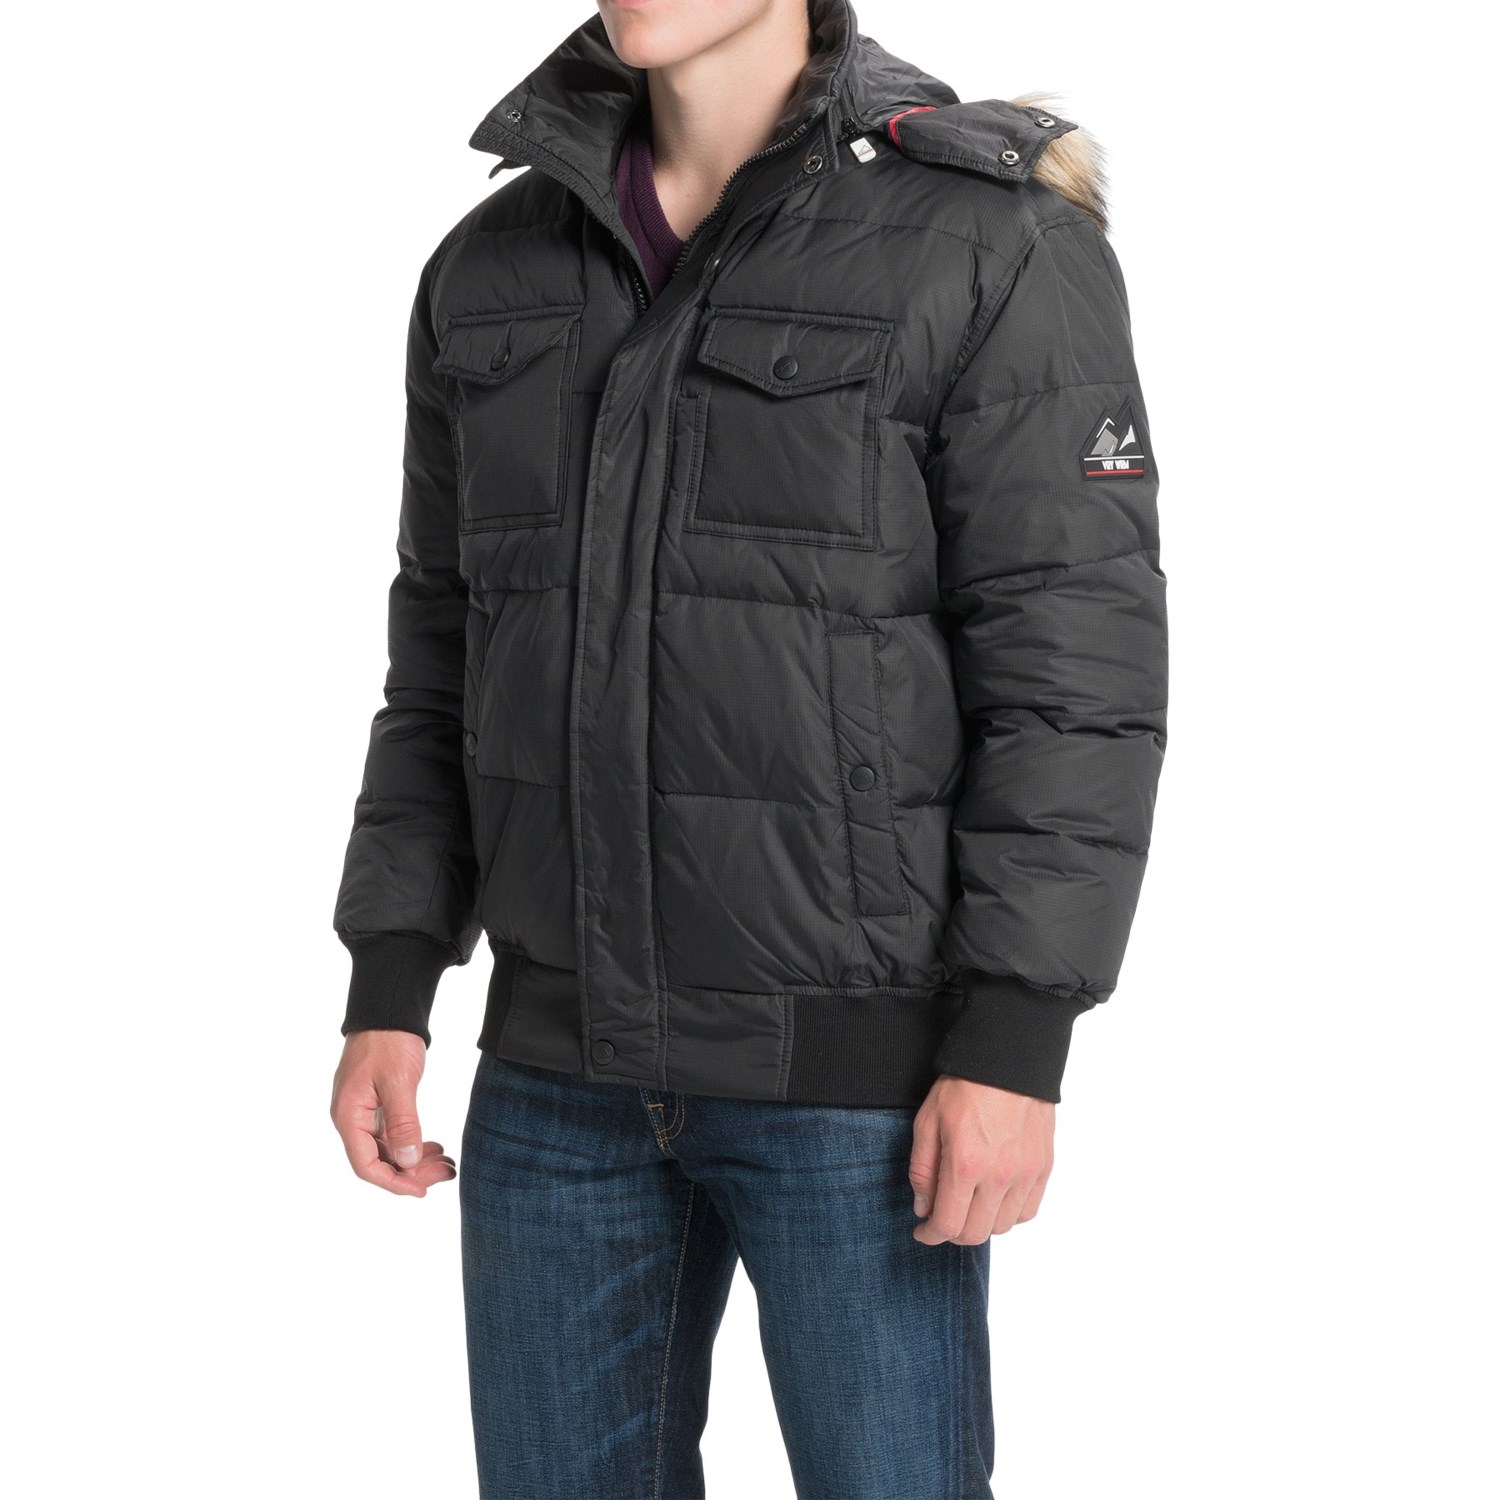 VRY WRM Lodge Down Bomber Jacket (For Men) - Save 82%